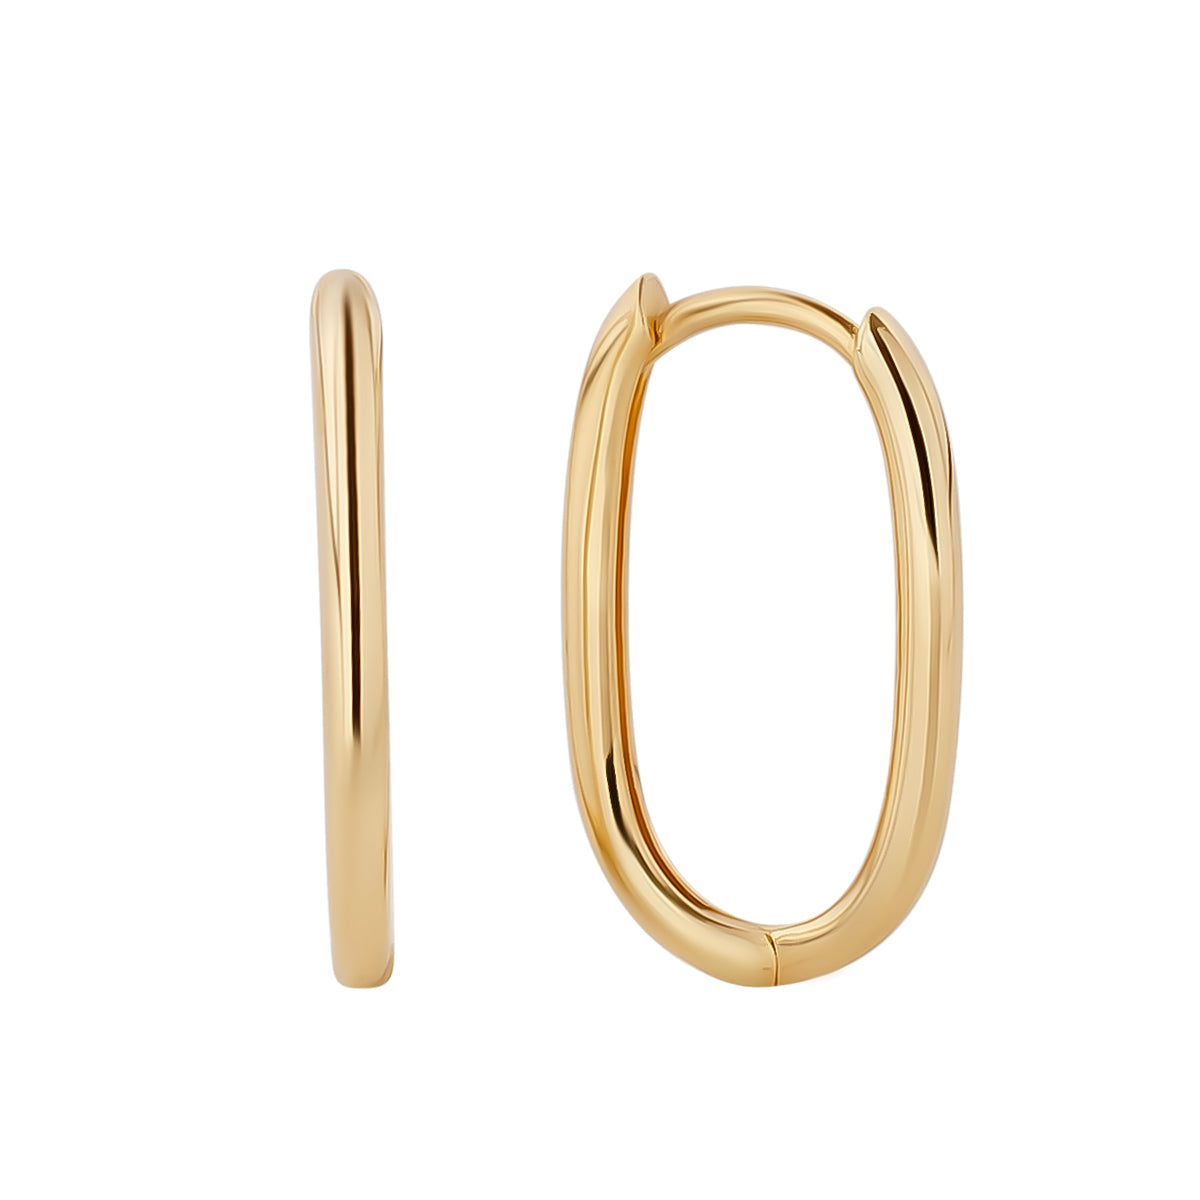 18ct Solid Gold Earrings | Hoops, Studs & Drops | Auric Jewellery